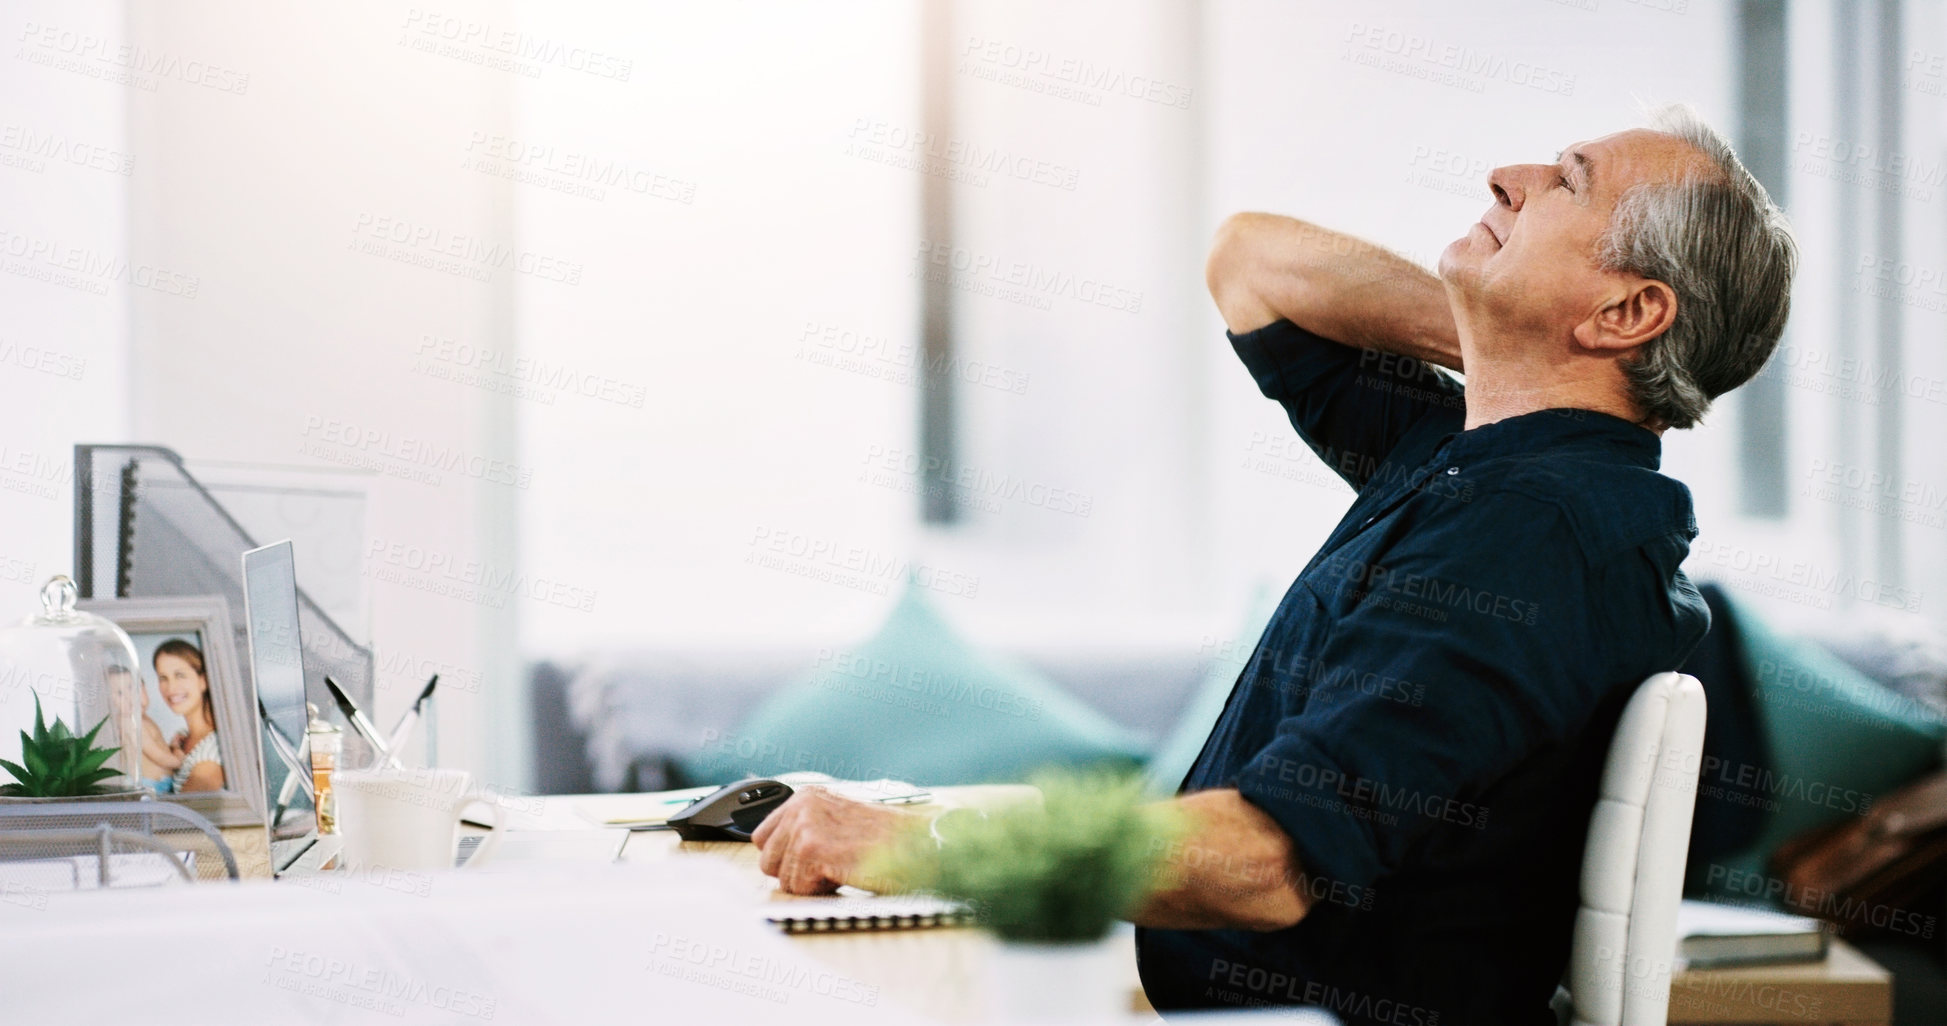 Buy stock photo Neck pain, posture and burnout with a business man suffering injury while working at a desk in his home office. Stress, mental health and anatomy with a mature male doing remote work with a sore neck